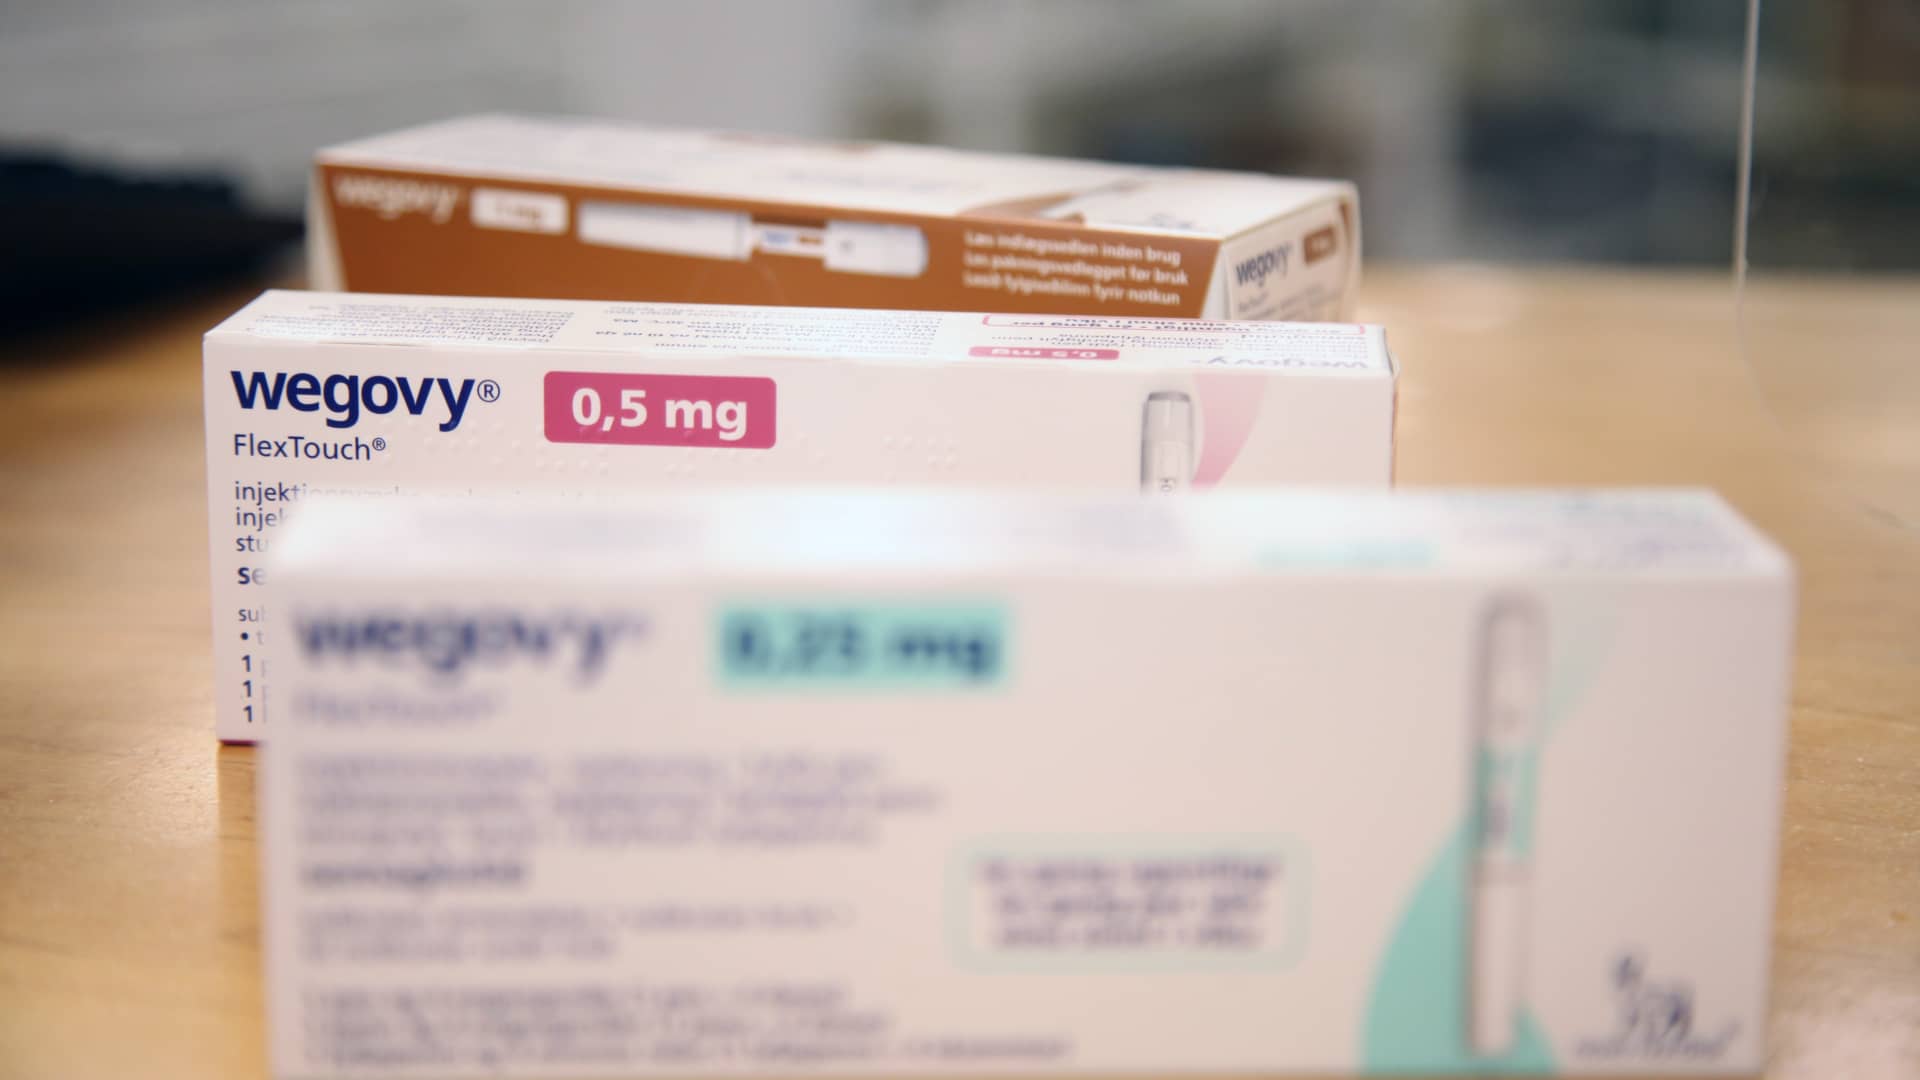 Weight loss drug Wegovy has launched in Germany — but users across Europe face a long and costly wait